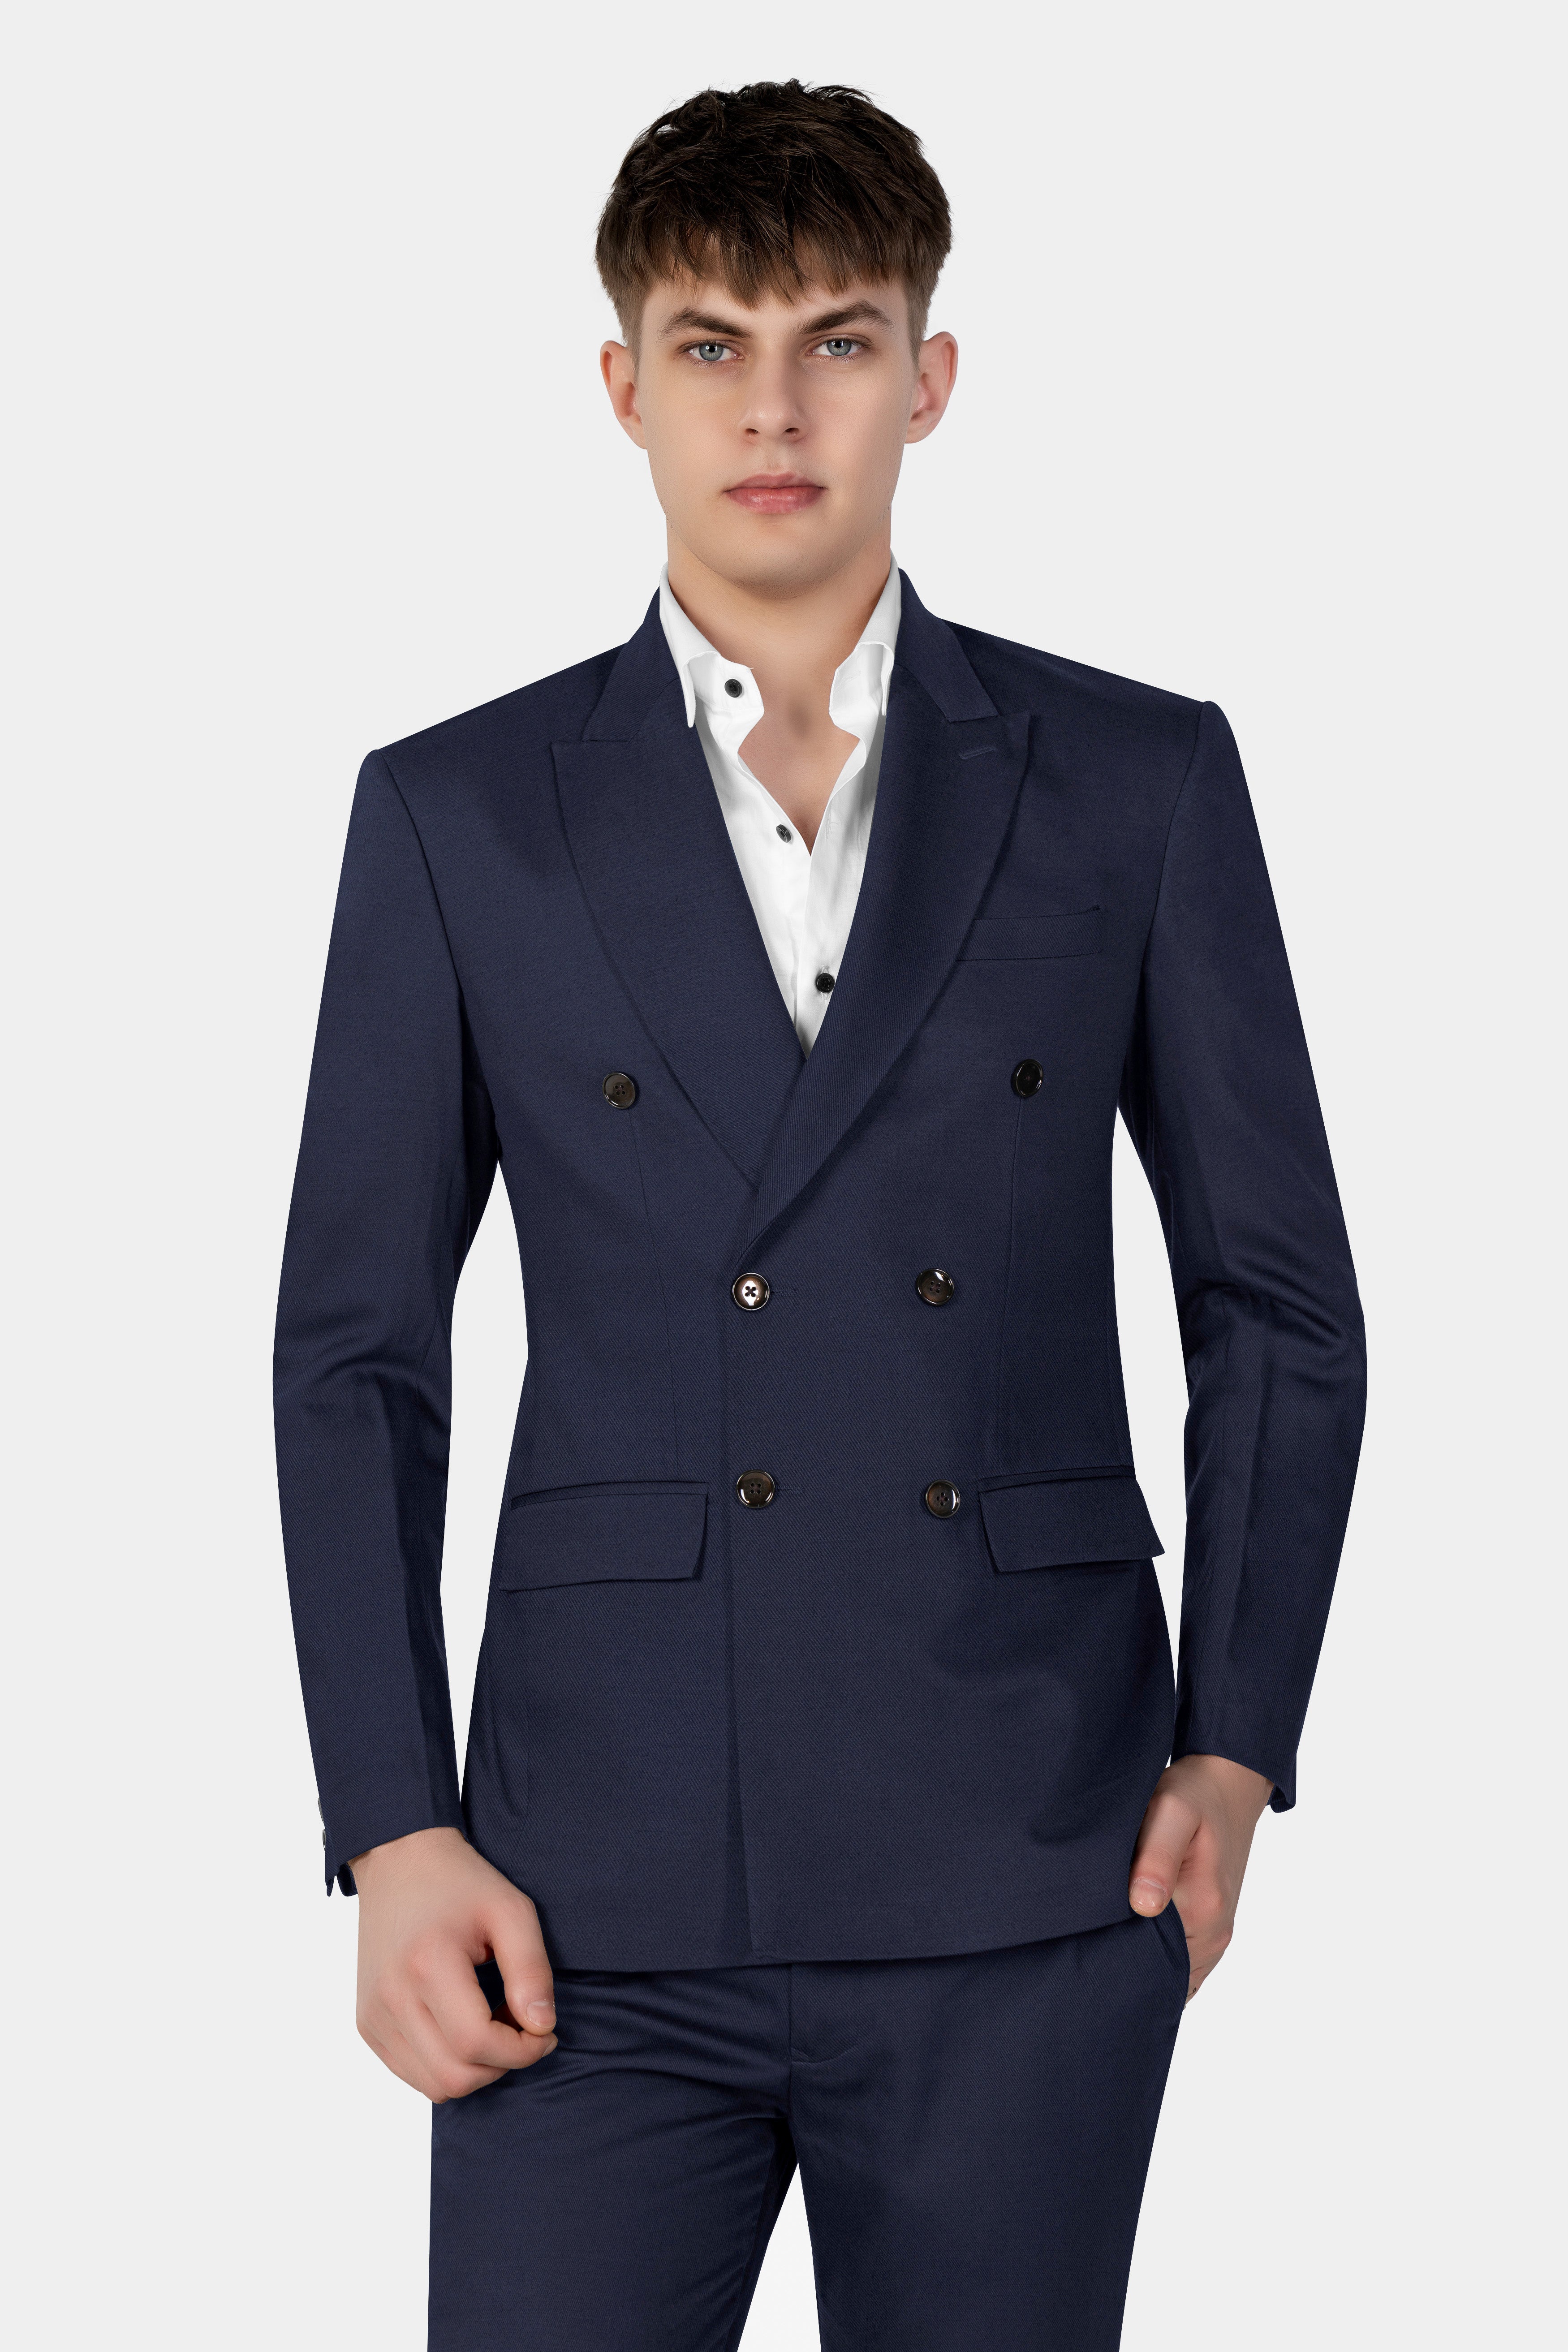 Vulcan Blue Plain Solid Wool Blend Double Breasted Blazer